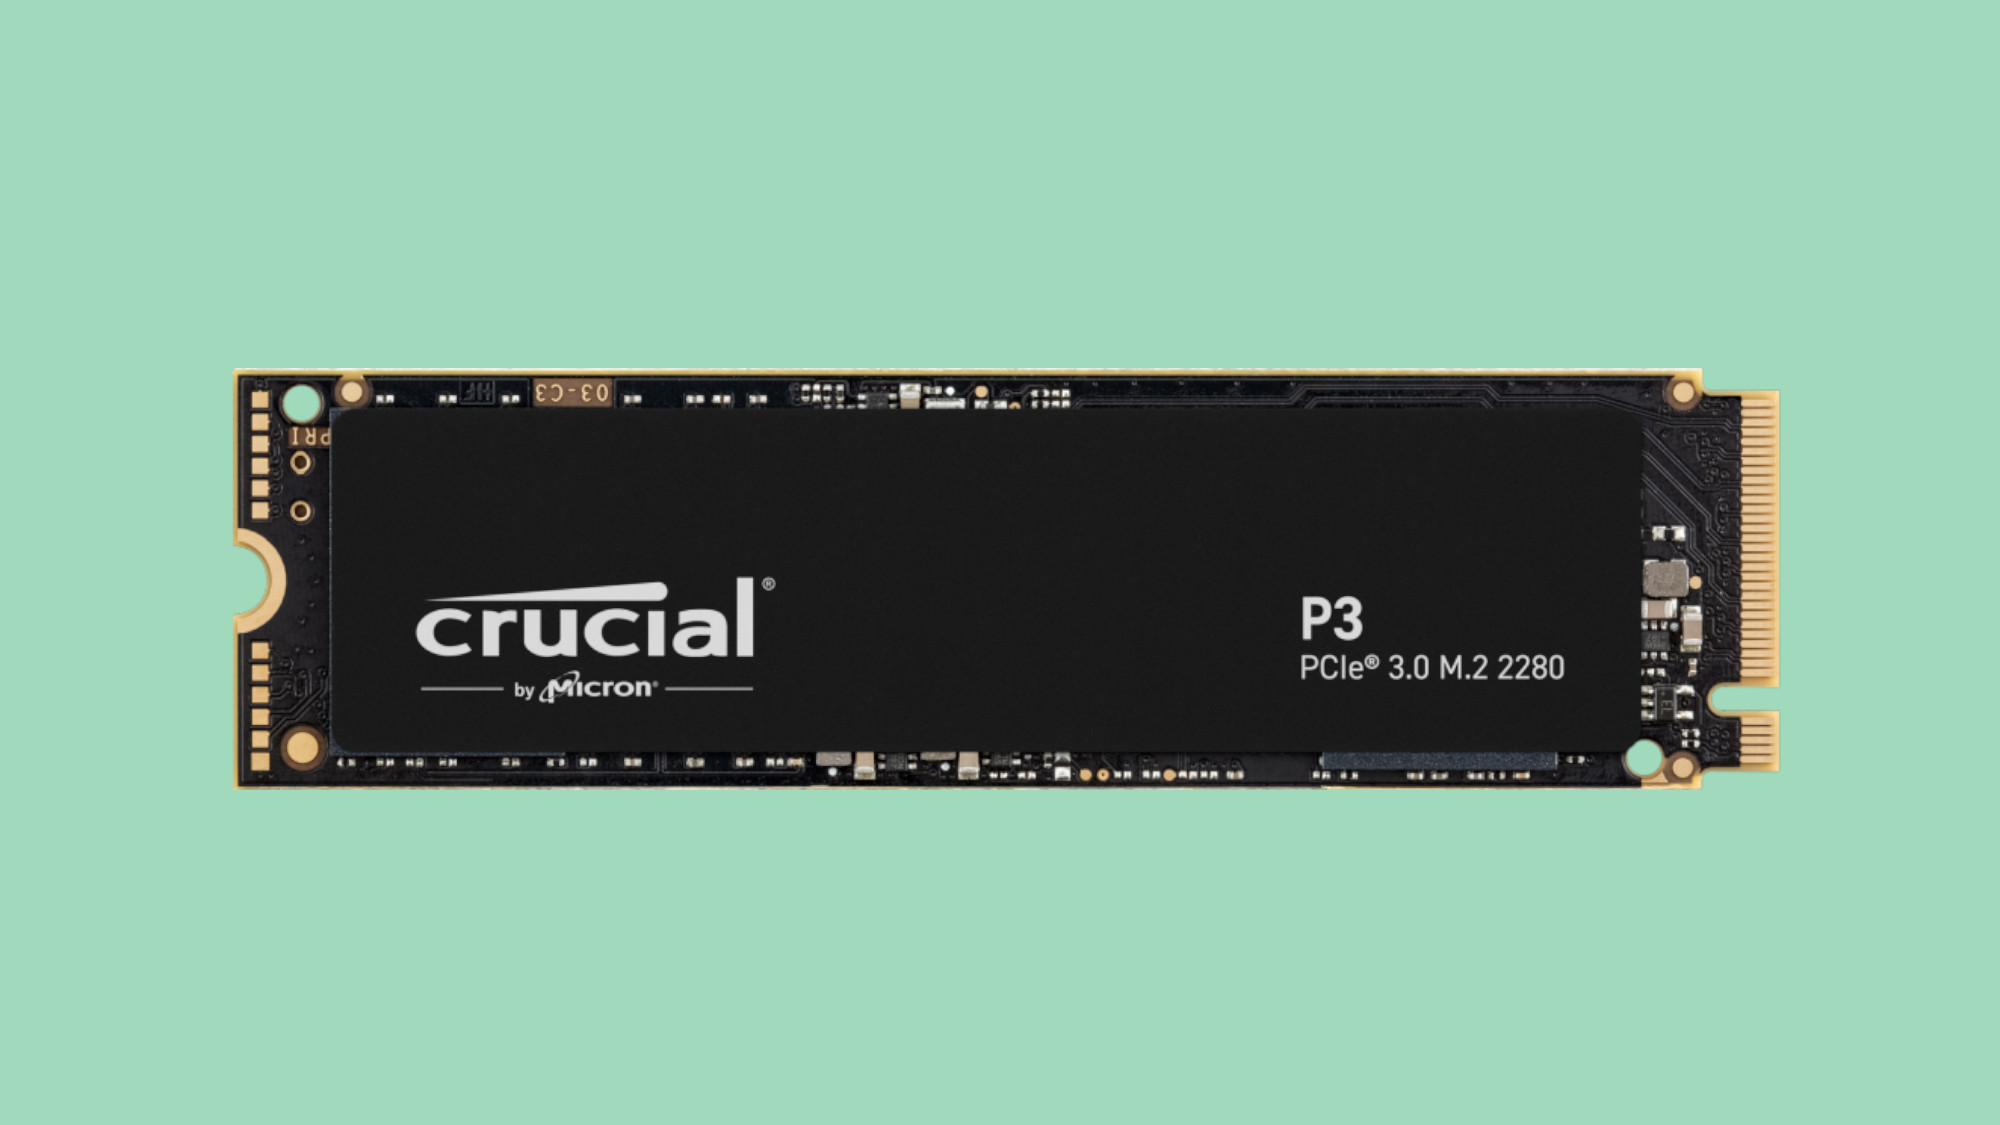 P3 Crucial SSD on a light green background